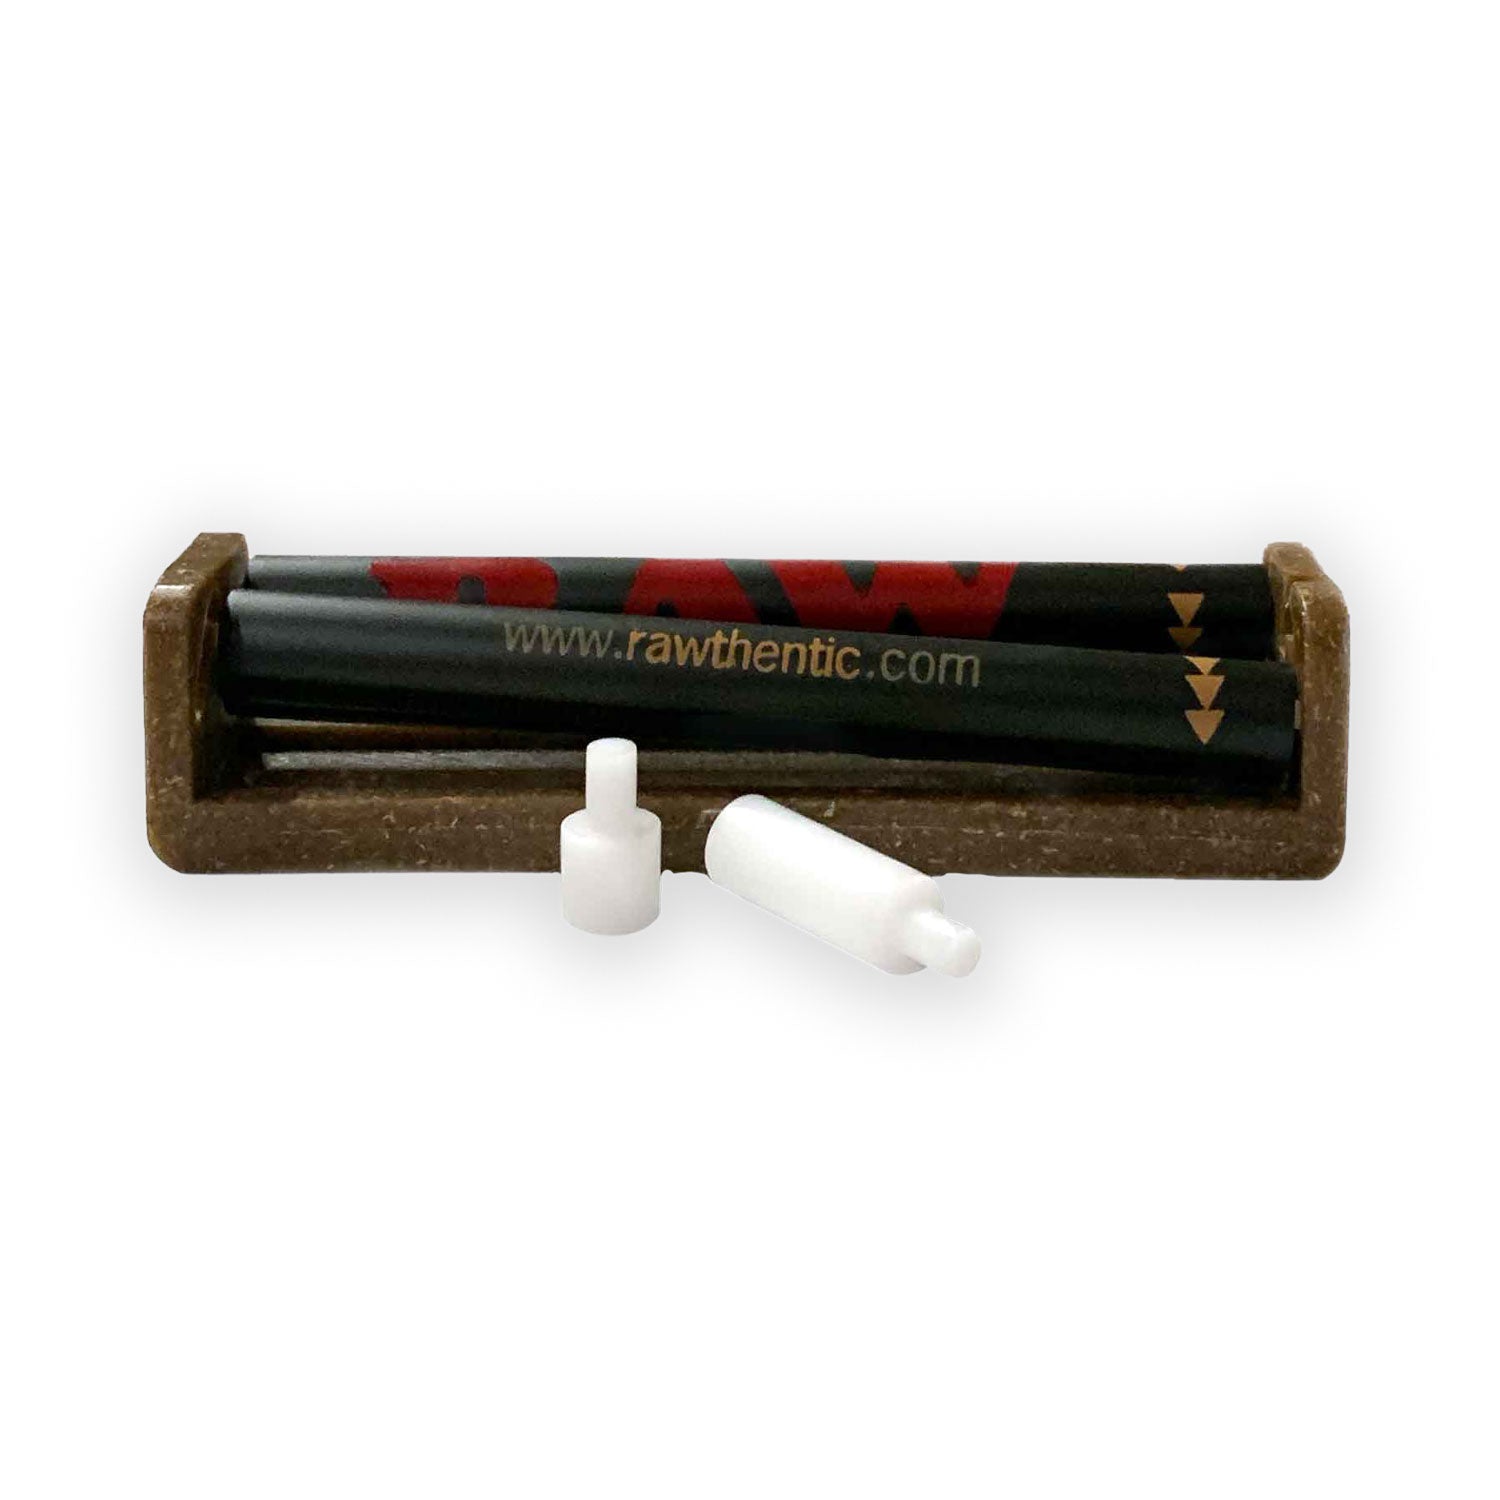 110mm/78mm portable Weed Grass Roller Cone Cigarette Tobacco Joint